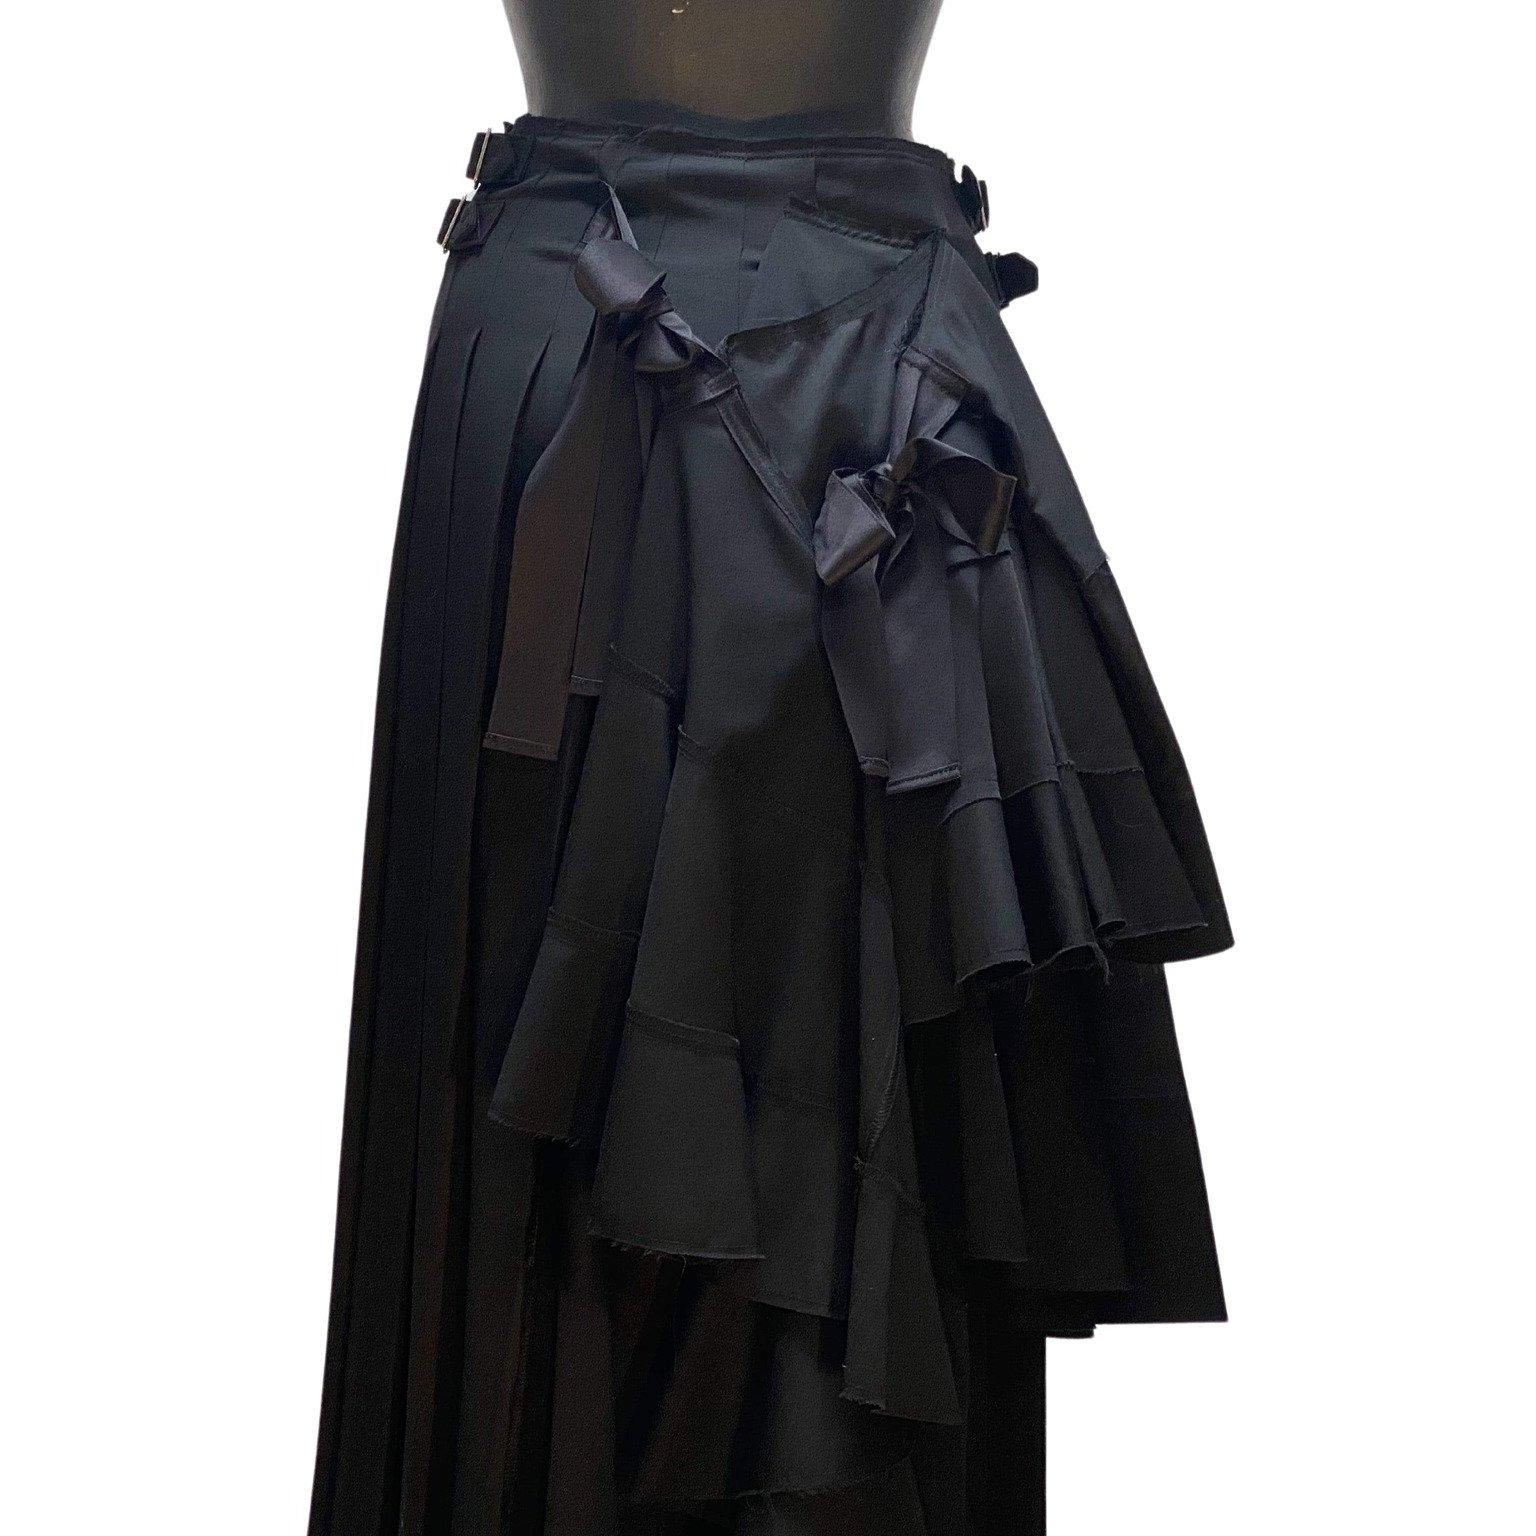 This luxuriously weighty, black pleated wool skirt wraps around and secures with two sturdy attached self-fabric buckles at each hip. The captivating back view features magnificently flowing layers, not to be outdone by the two elegant satin bows. A